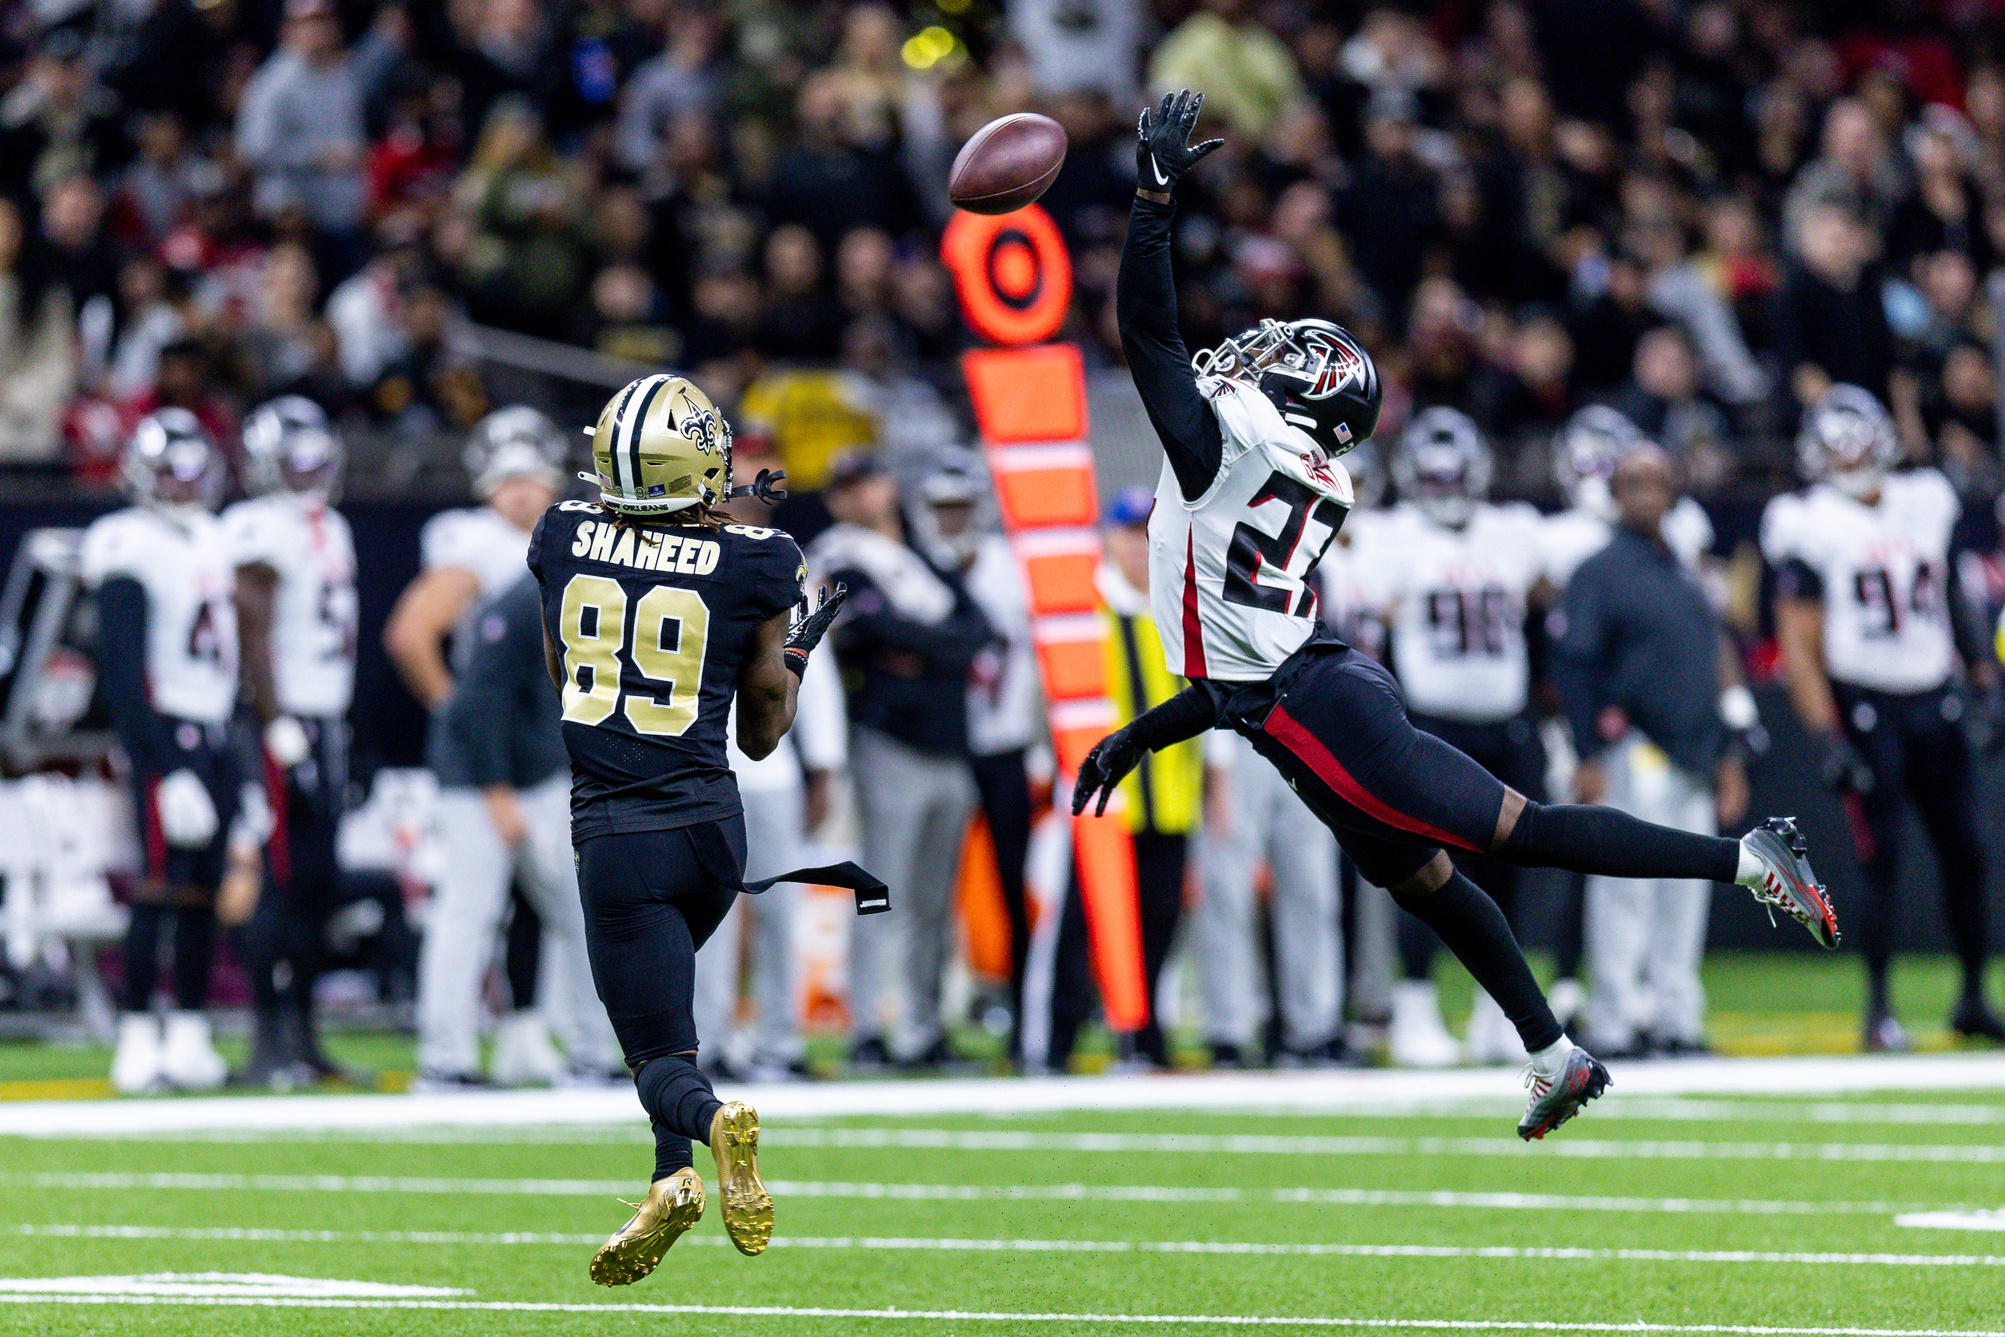 Dec 18, 2022; New Orleans Saints receiver Rashid Shaheed (89) catches a long touchdown pass behind Atlanta Falcons safety Richie Grant (27). Mandatory Credit: Stephen Lew-USA TODAY